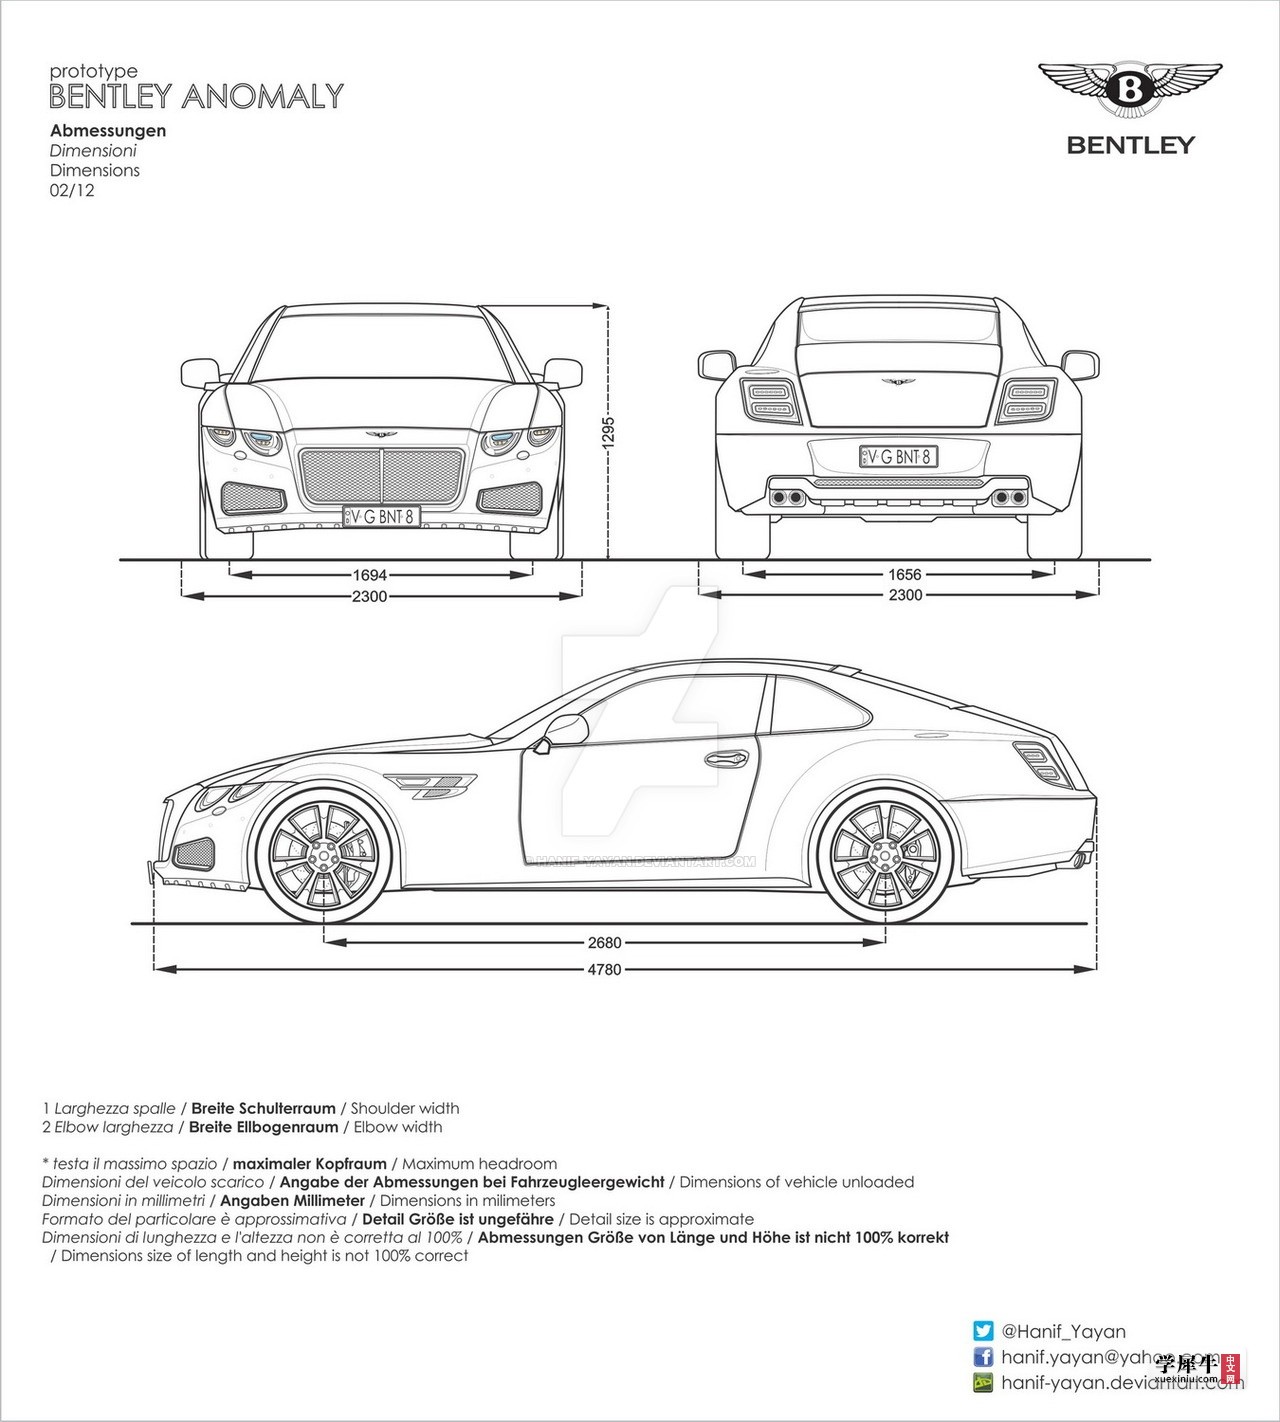 bentley_anomaly_concept_design_blueprints_by_hanif_yayan-d774ms6.jpg